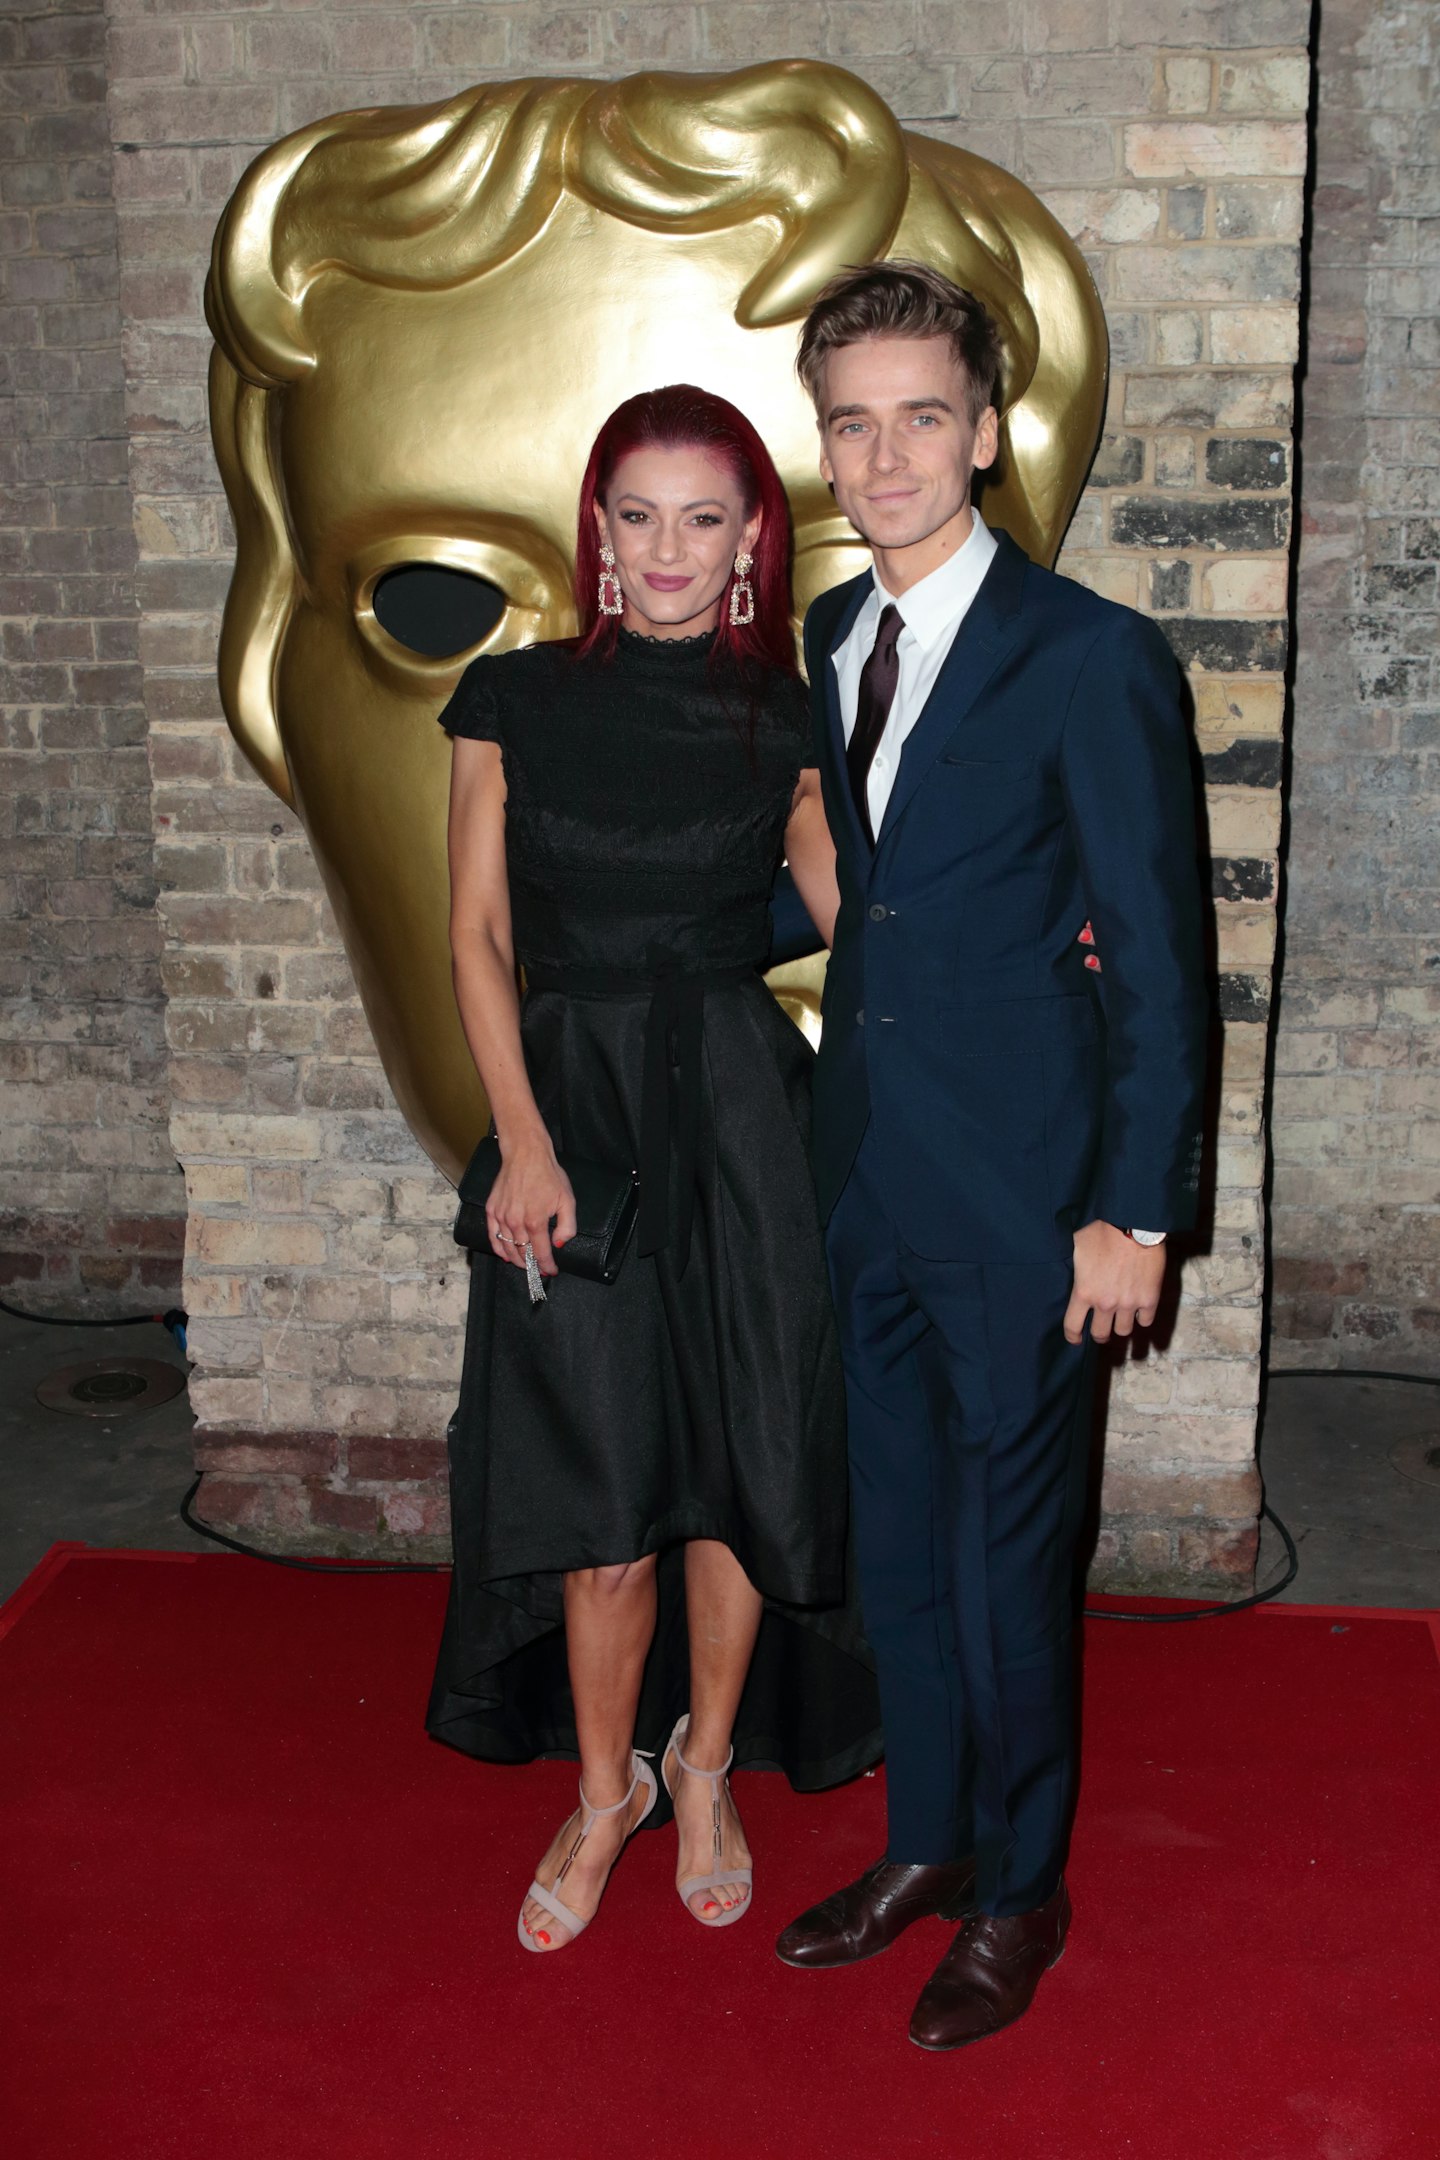 Joe Sugg Dianne Buswell on red carpet 